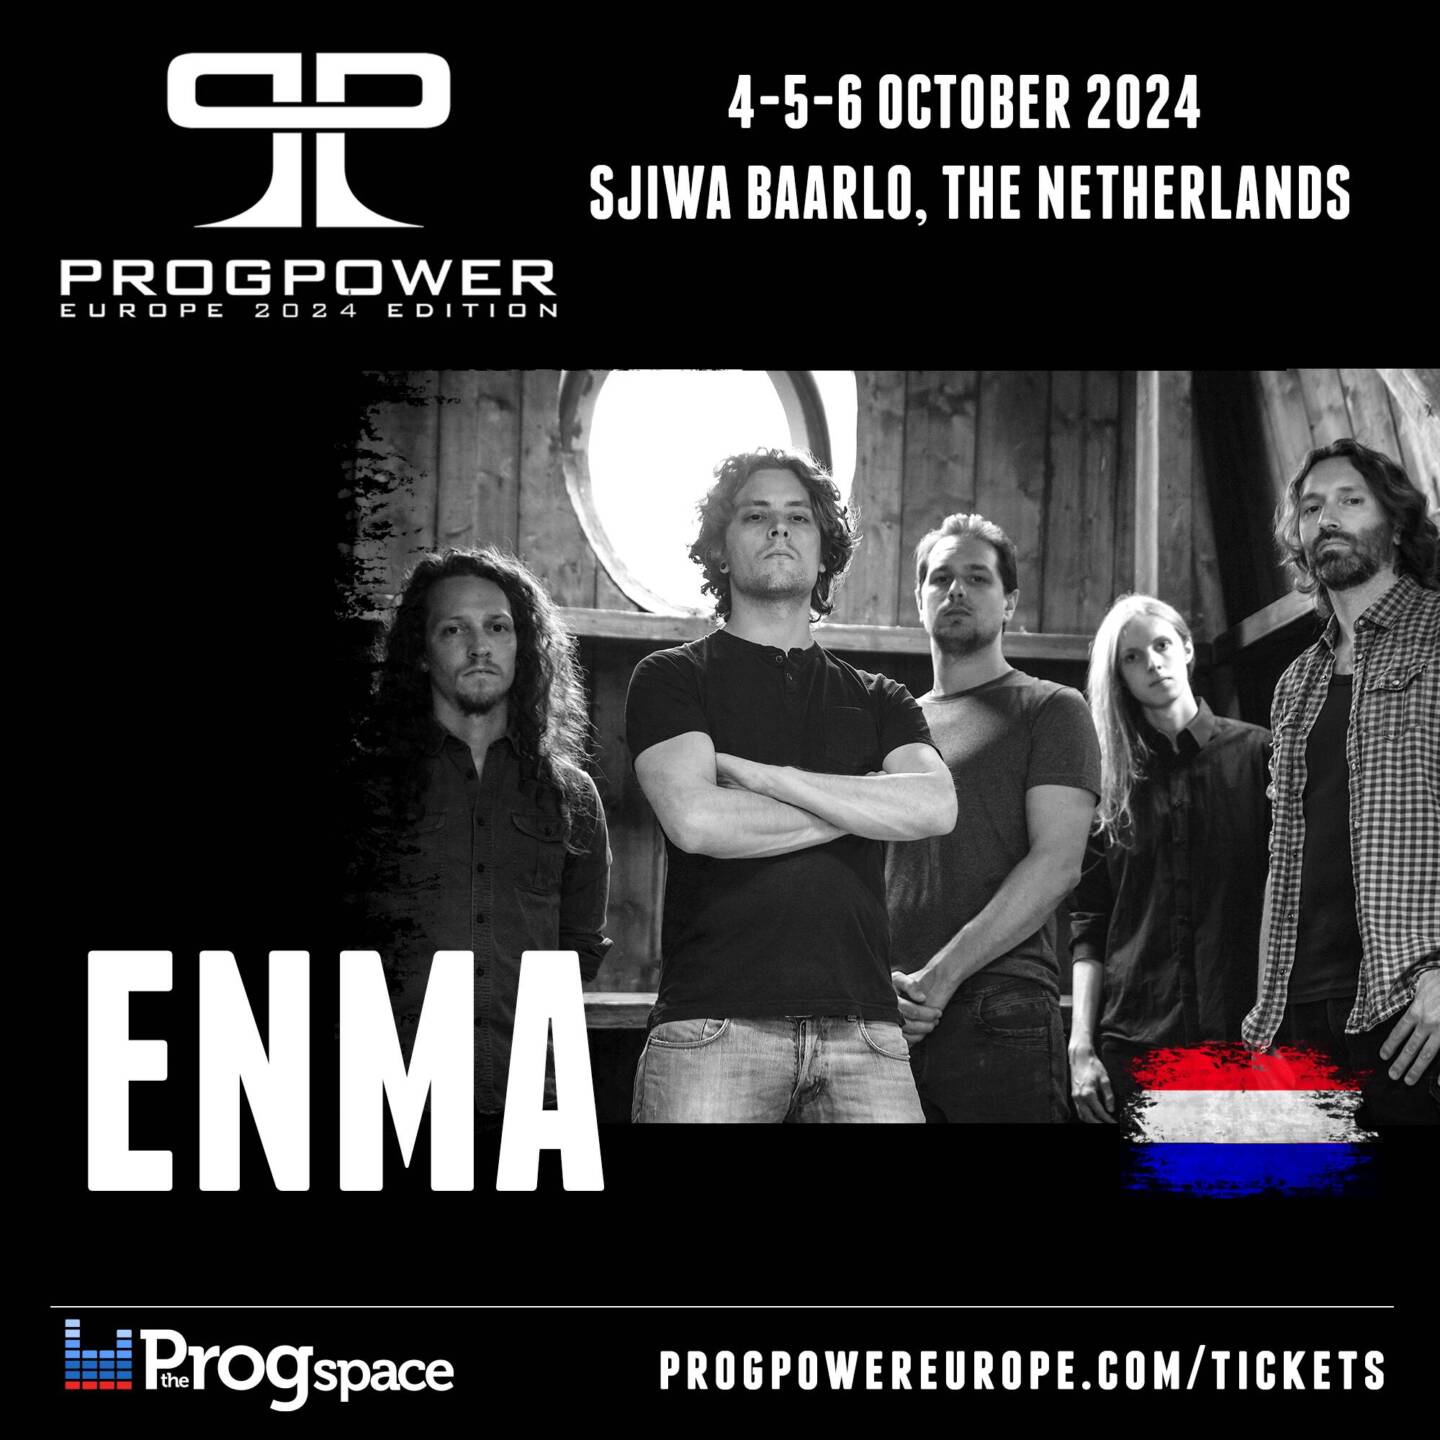 ENMA from the Netherlands is the 8th band to play at ProgPower Europe!